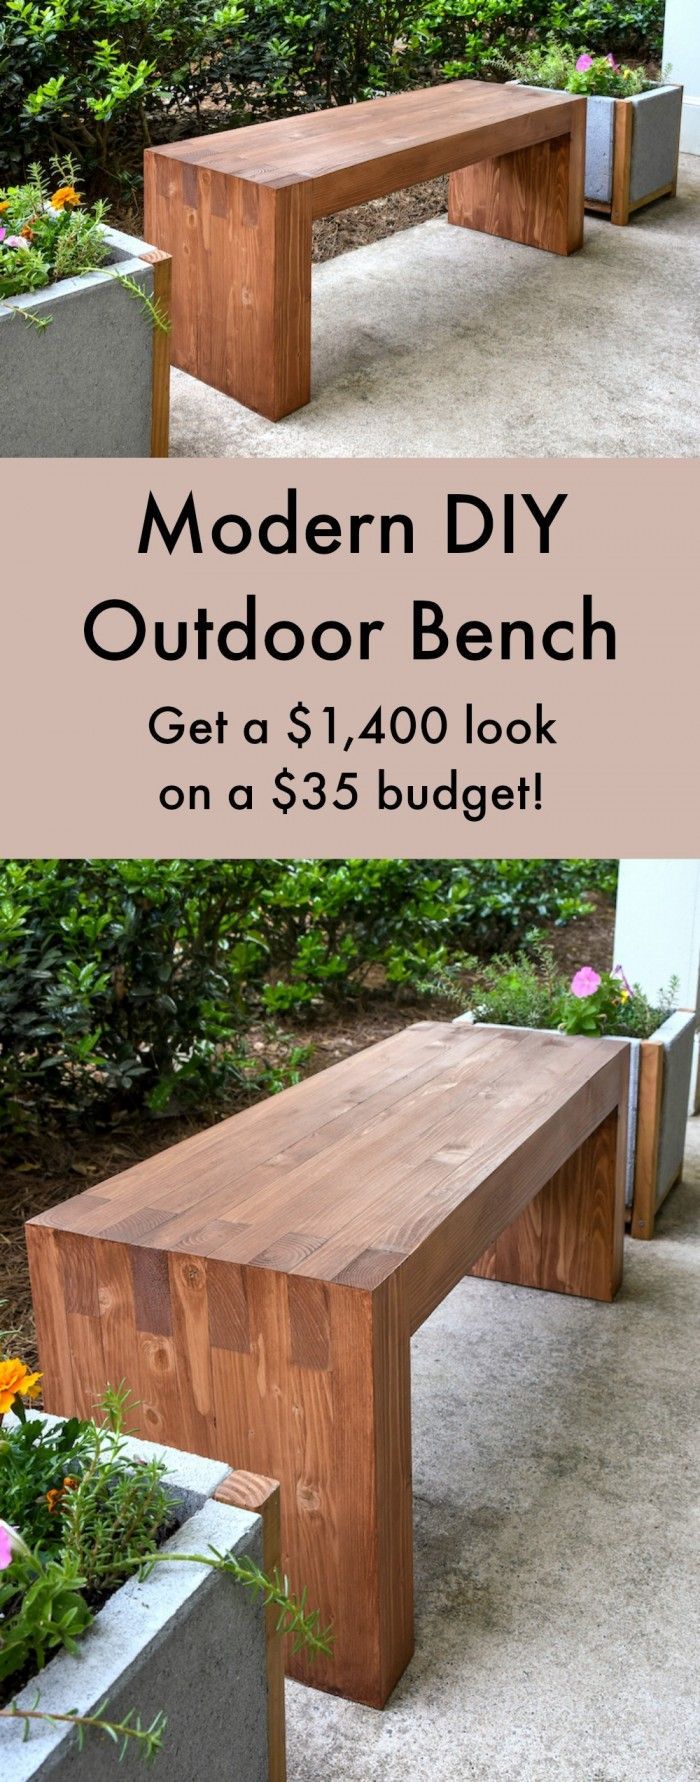 DIY Outdoor Bench Inspired By Williams Sonoma (So Easy!) - DIY Outdoor Bench Inspired By Williams Sonoma (So Easy!) -   19 diy Wood bench ideas